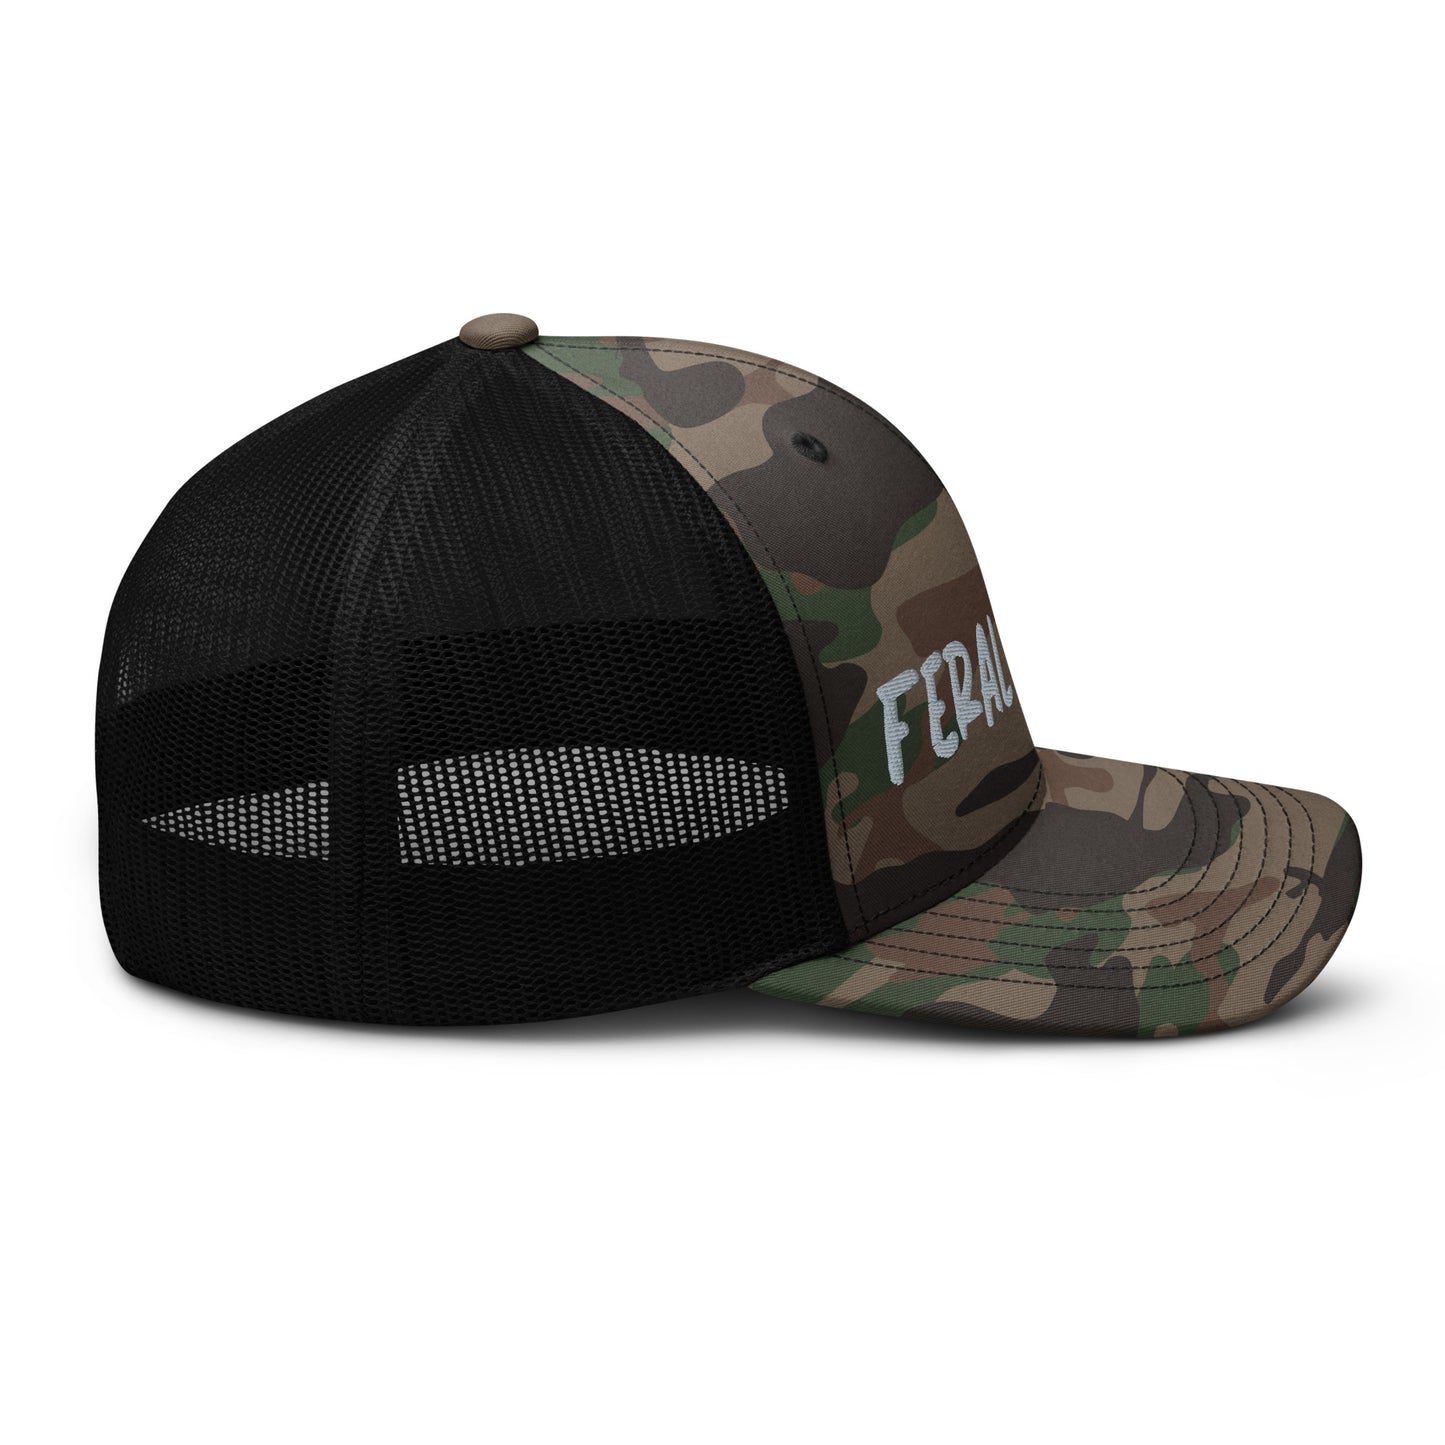 FERAL - Embroidered Camo Hat